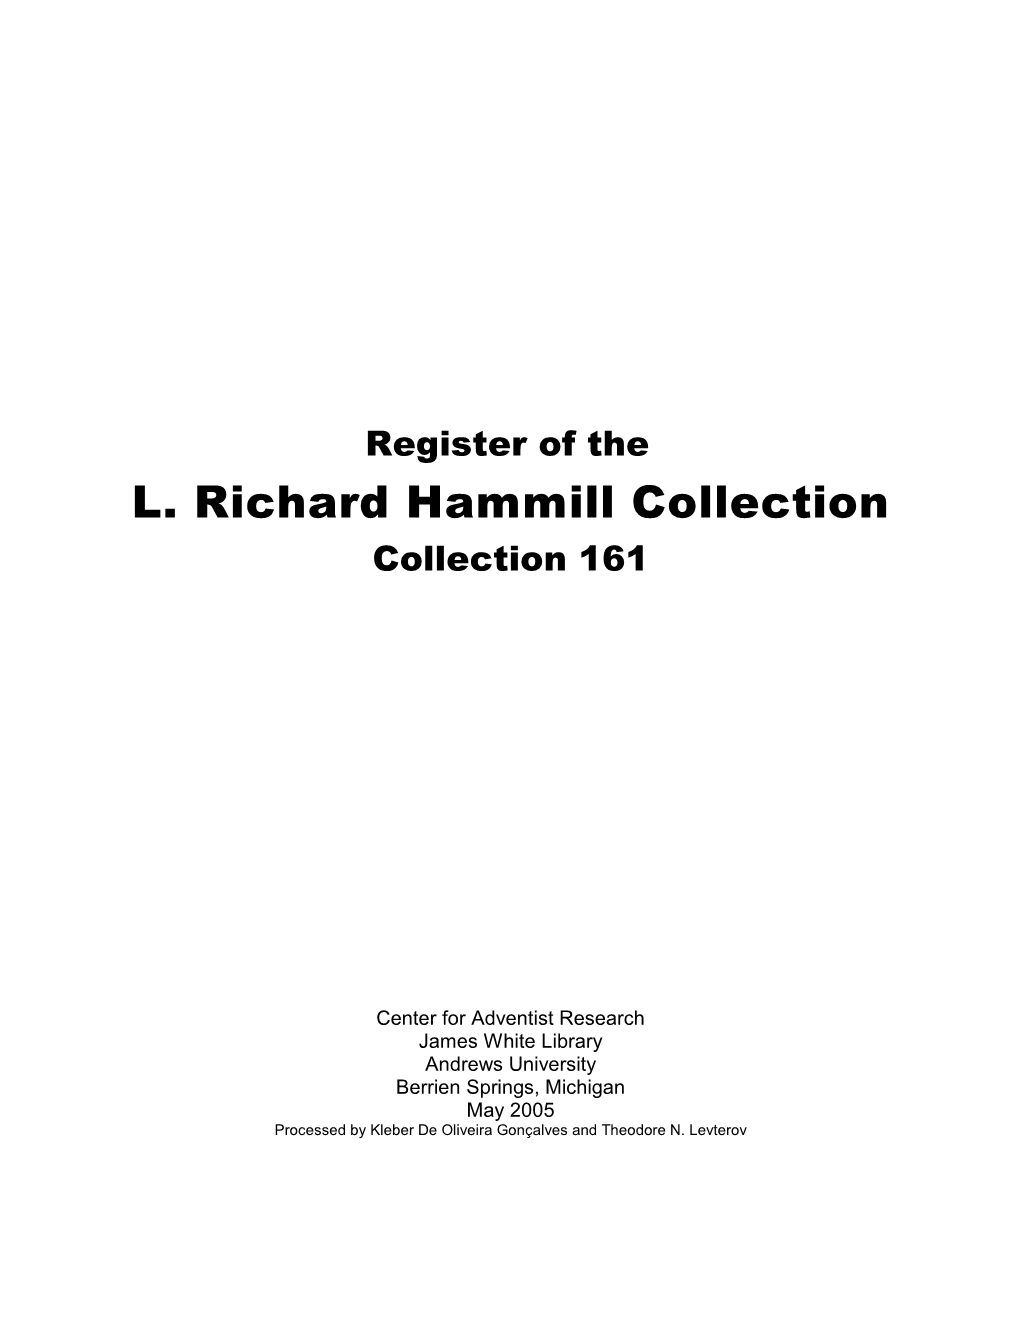 L. Richard Hammill Collection Collection 161